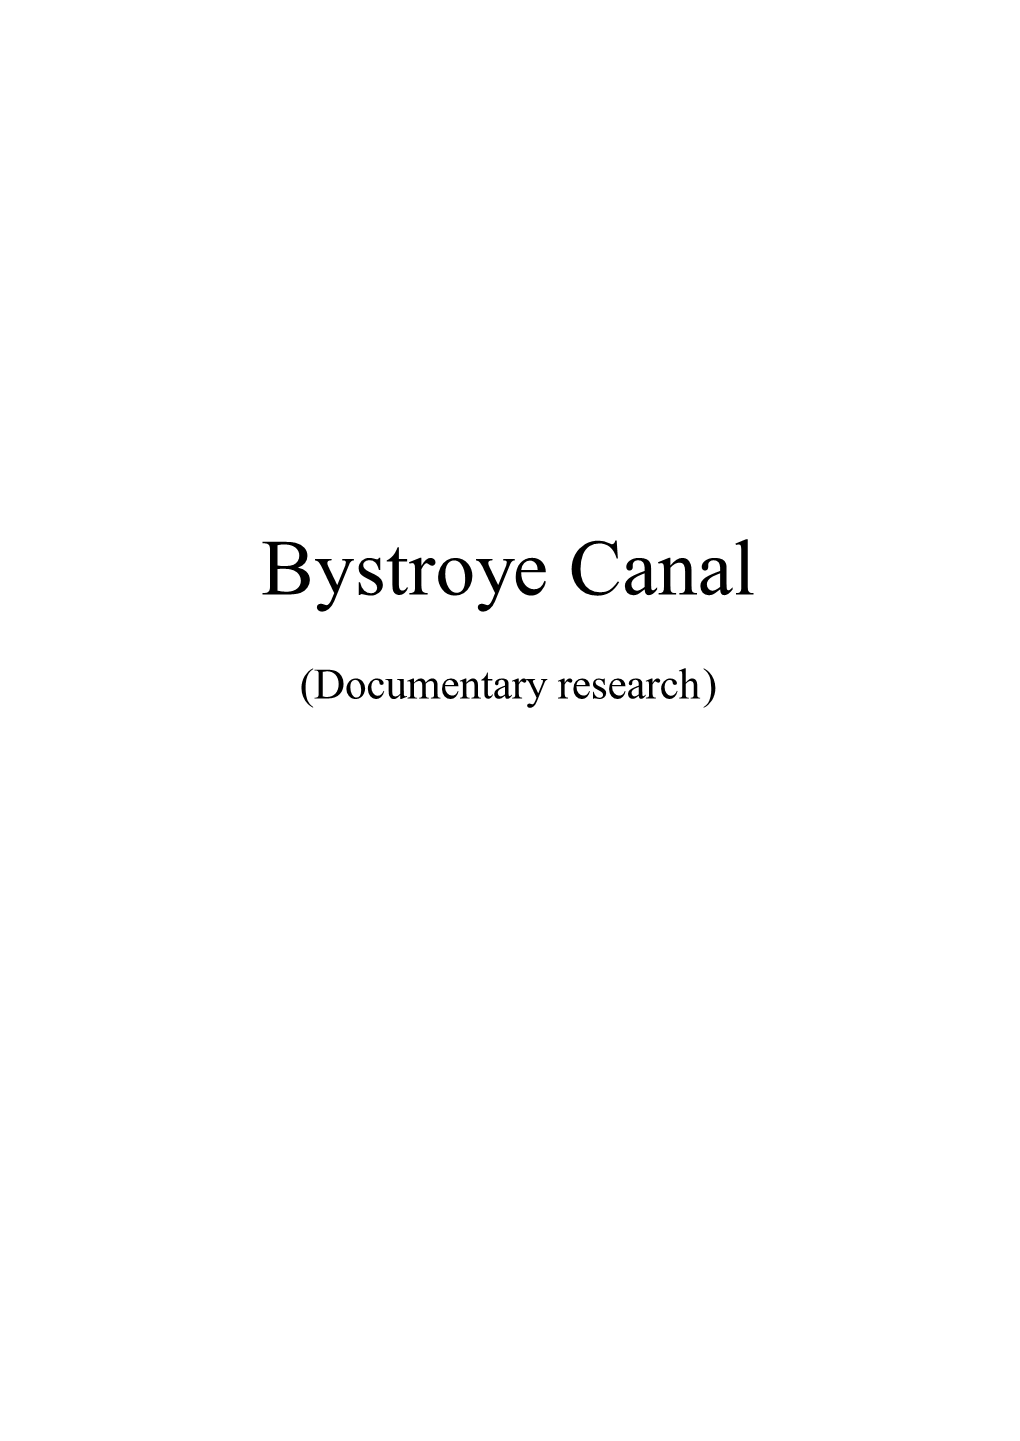 Bystroye Canal